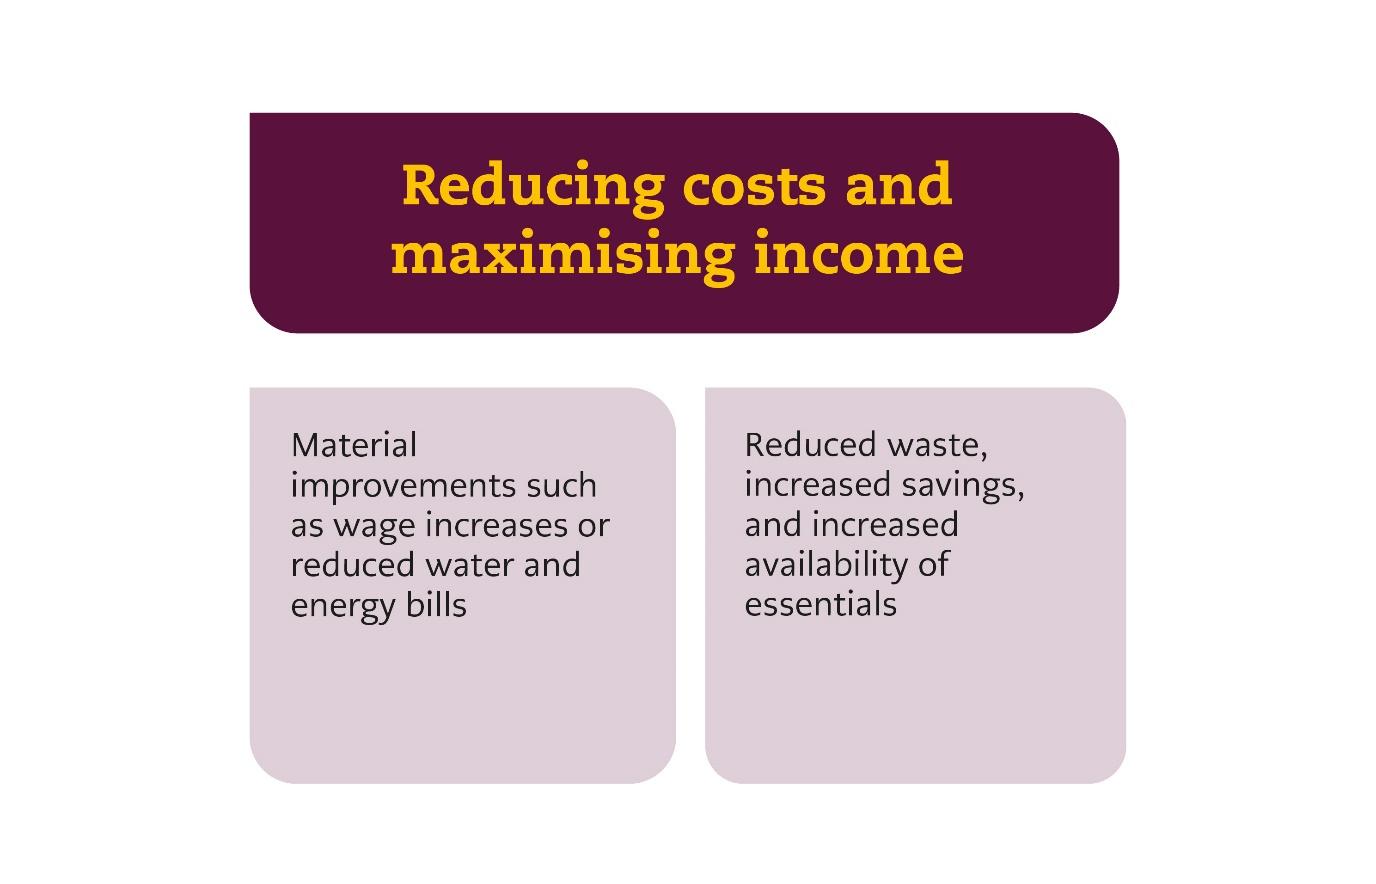 An infographic - the text says: Reducing costs and maximising income Reduced waste, increased savings, and increased availability of essentials Material improvements such as wage increases or reduced water and energy bills